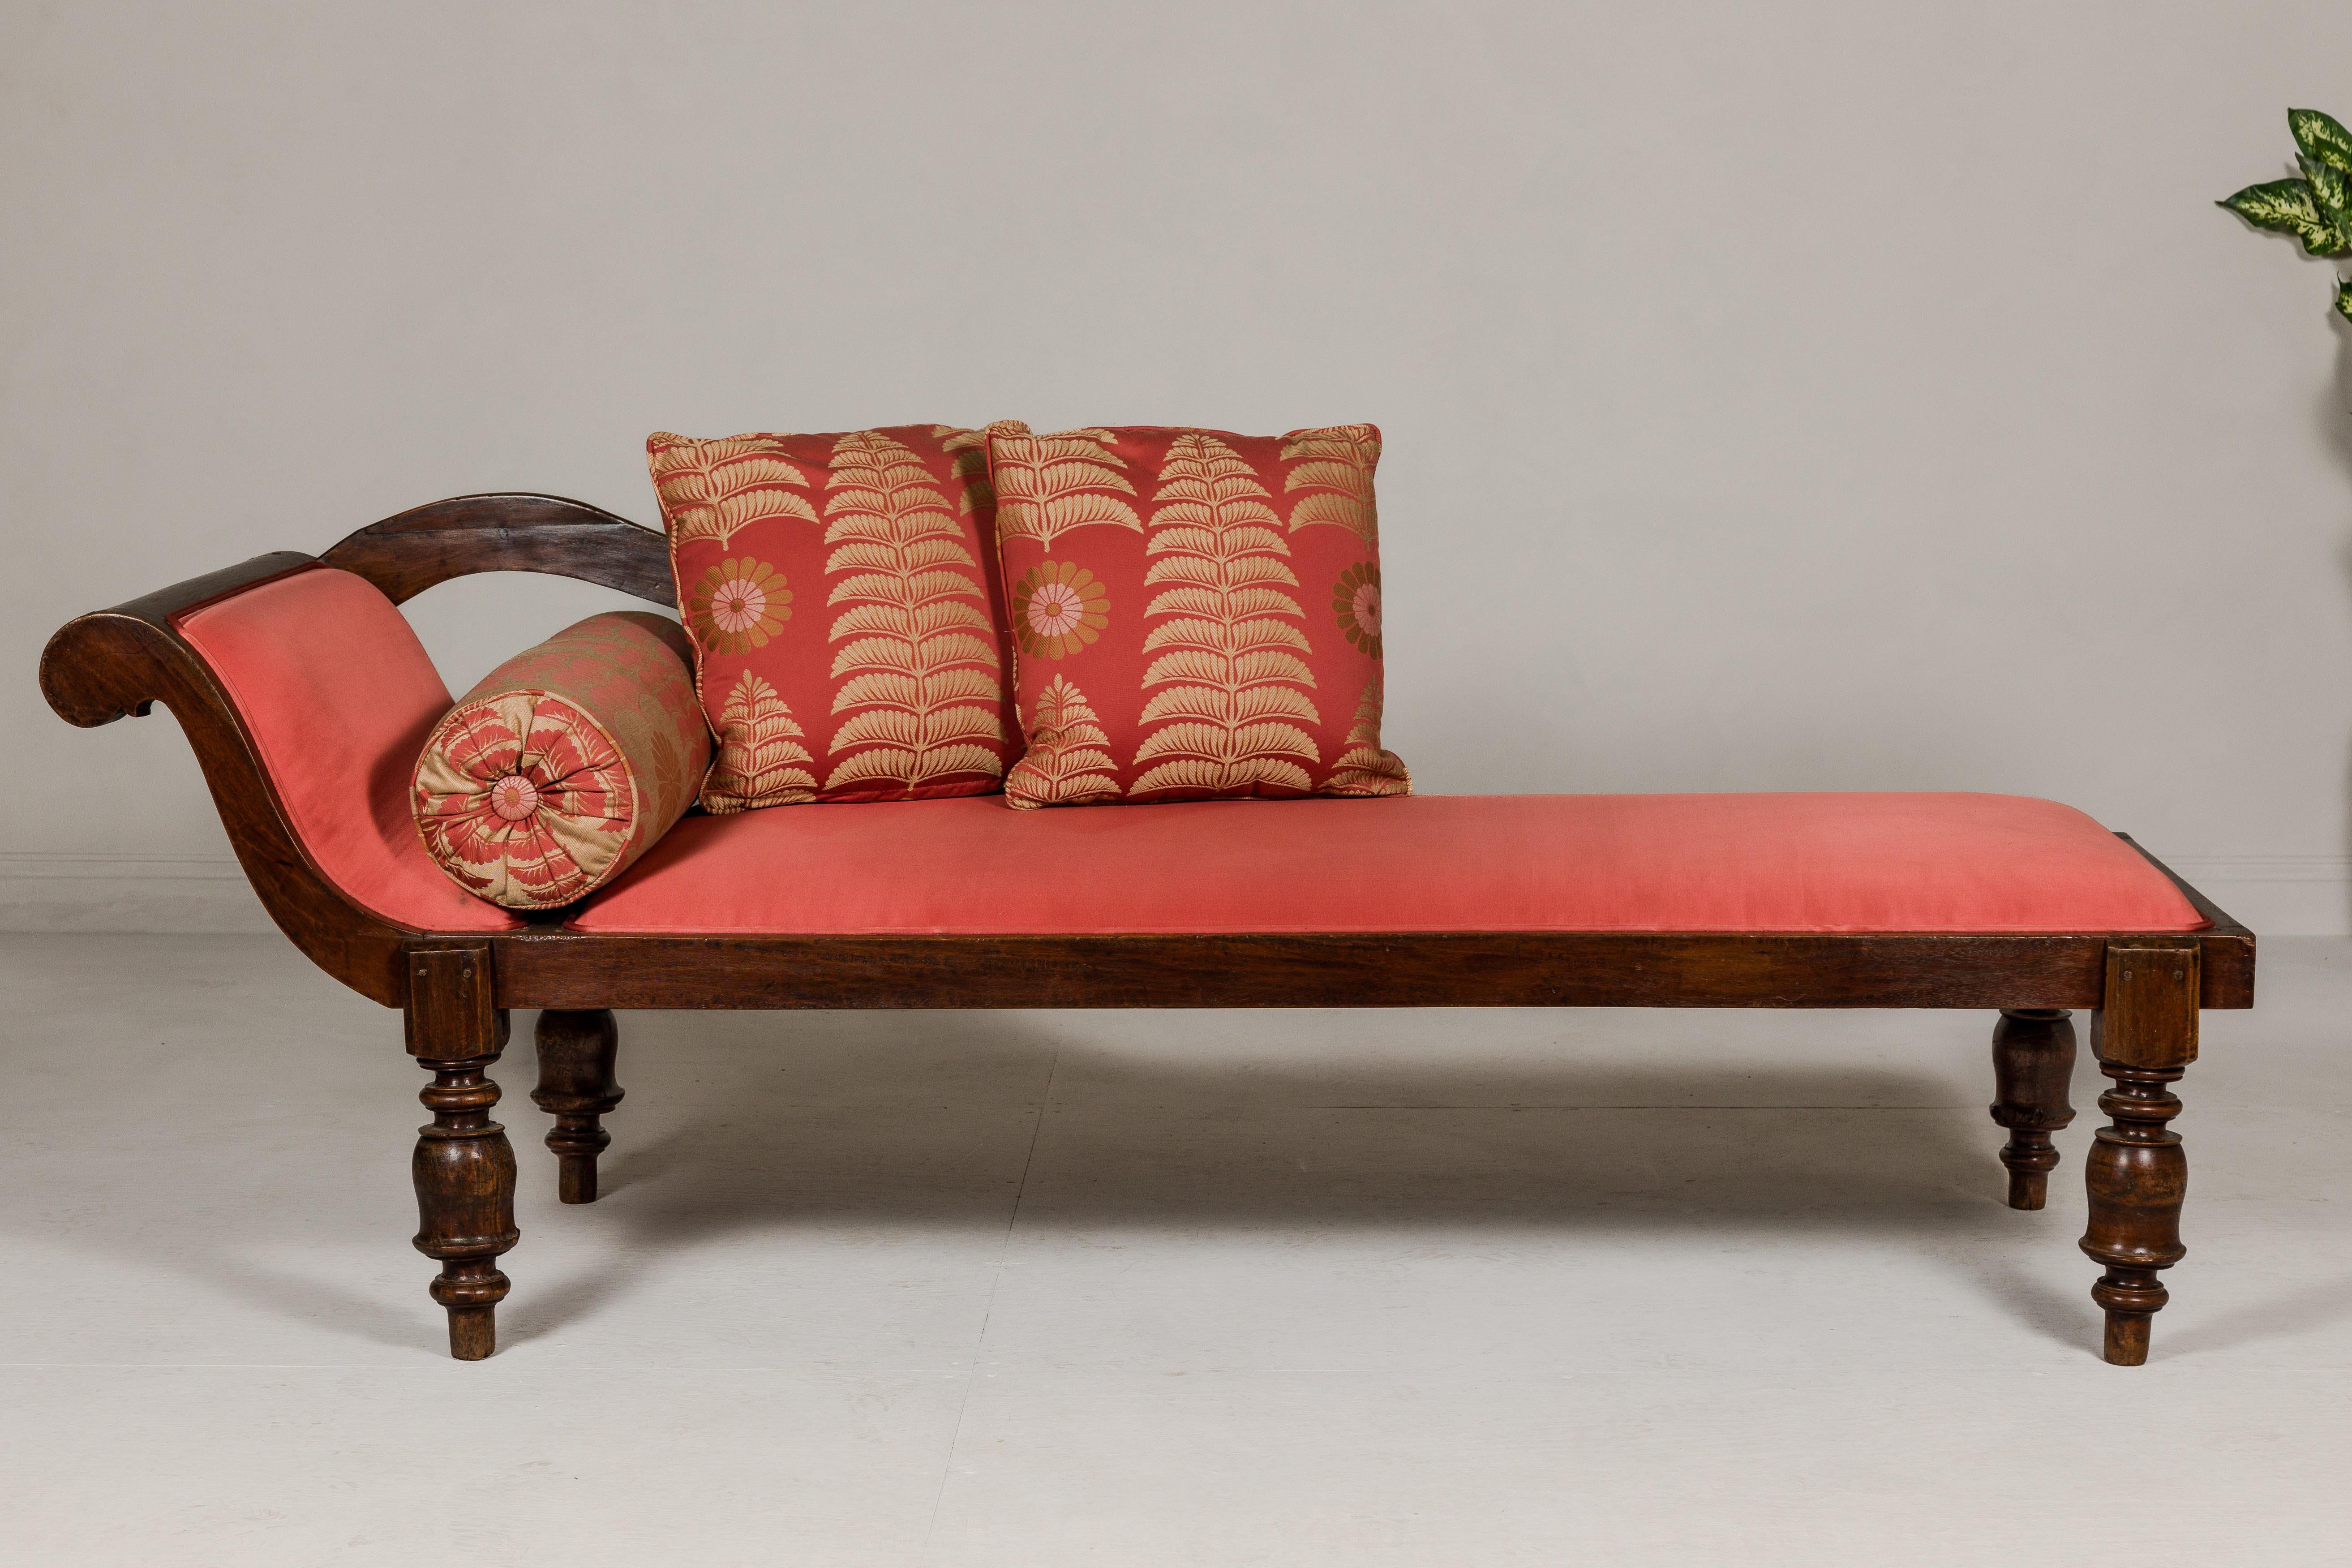 An antique Récamier style wooden daybed with silk fabric cushion, out-scrolling back and turned legs. This antique Récamier-style wooden daybed is a testament to timeless elegance and comfort. Its design exudes sophistication and refinement, making